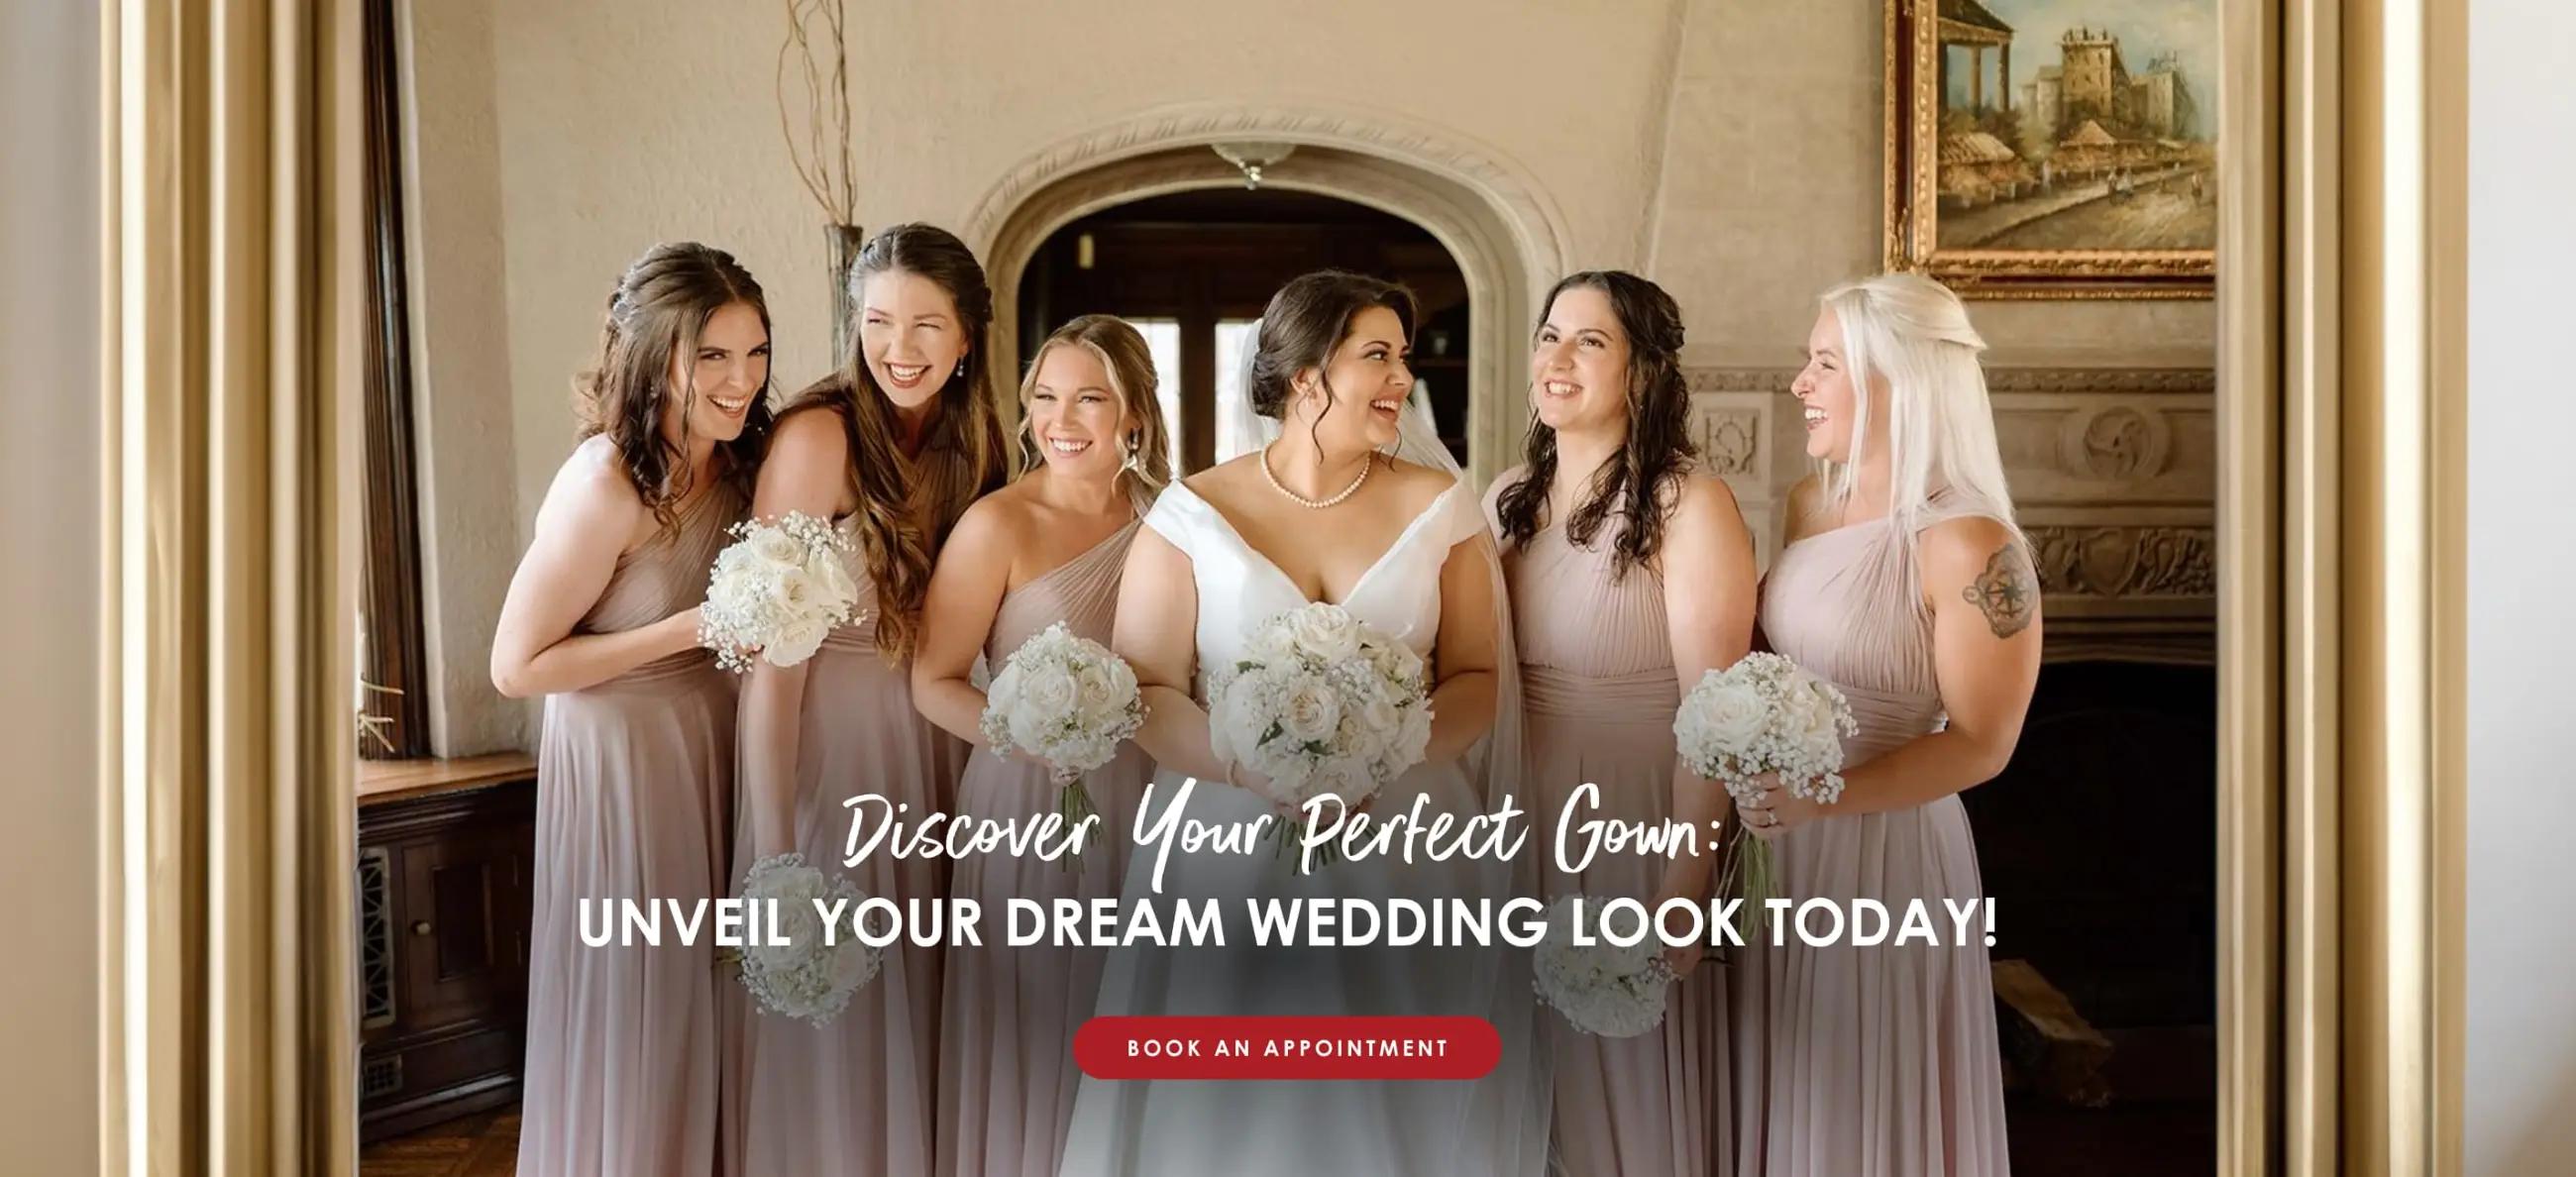 Discover your dream wedding dress at It's Your Day